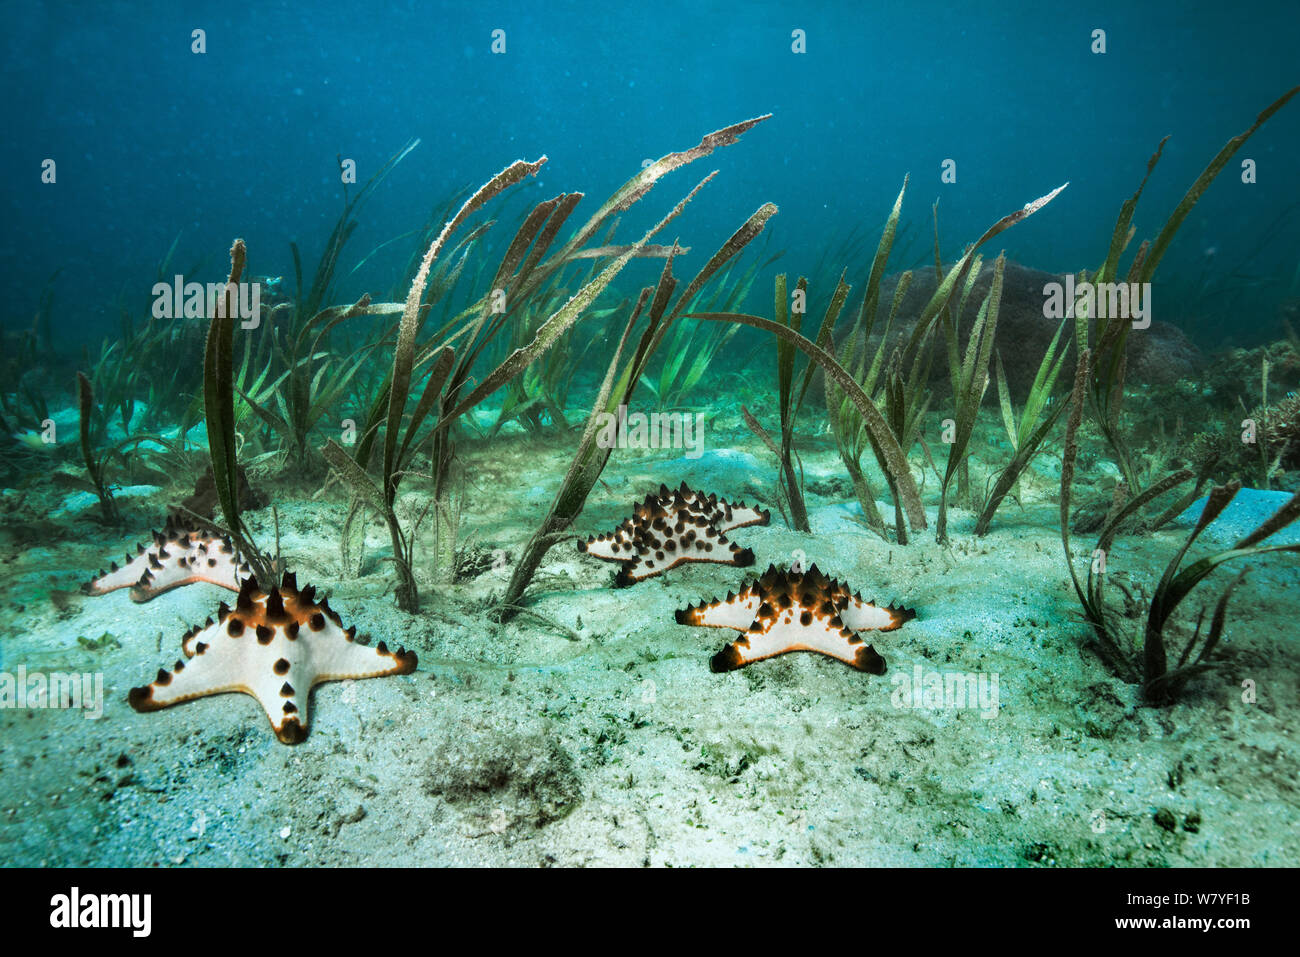 Sea grass / turtle grass (Ehalus acoroides) and Horned Sea Star / Chocolate Chip Sea Star (Protoreaster nodosus), Lembeh Strait, North Sulawesi, Indonesia. Stock Photo